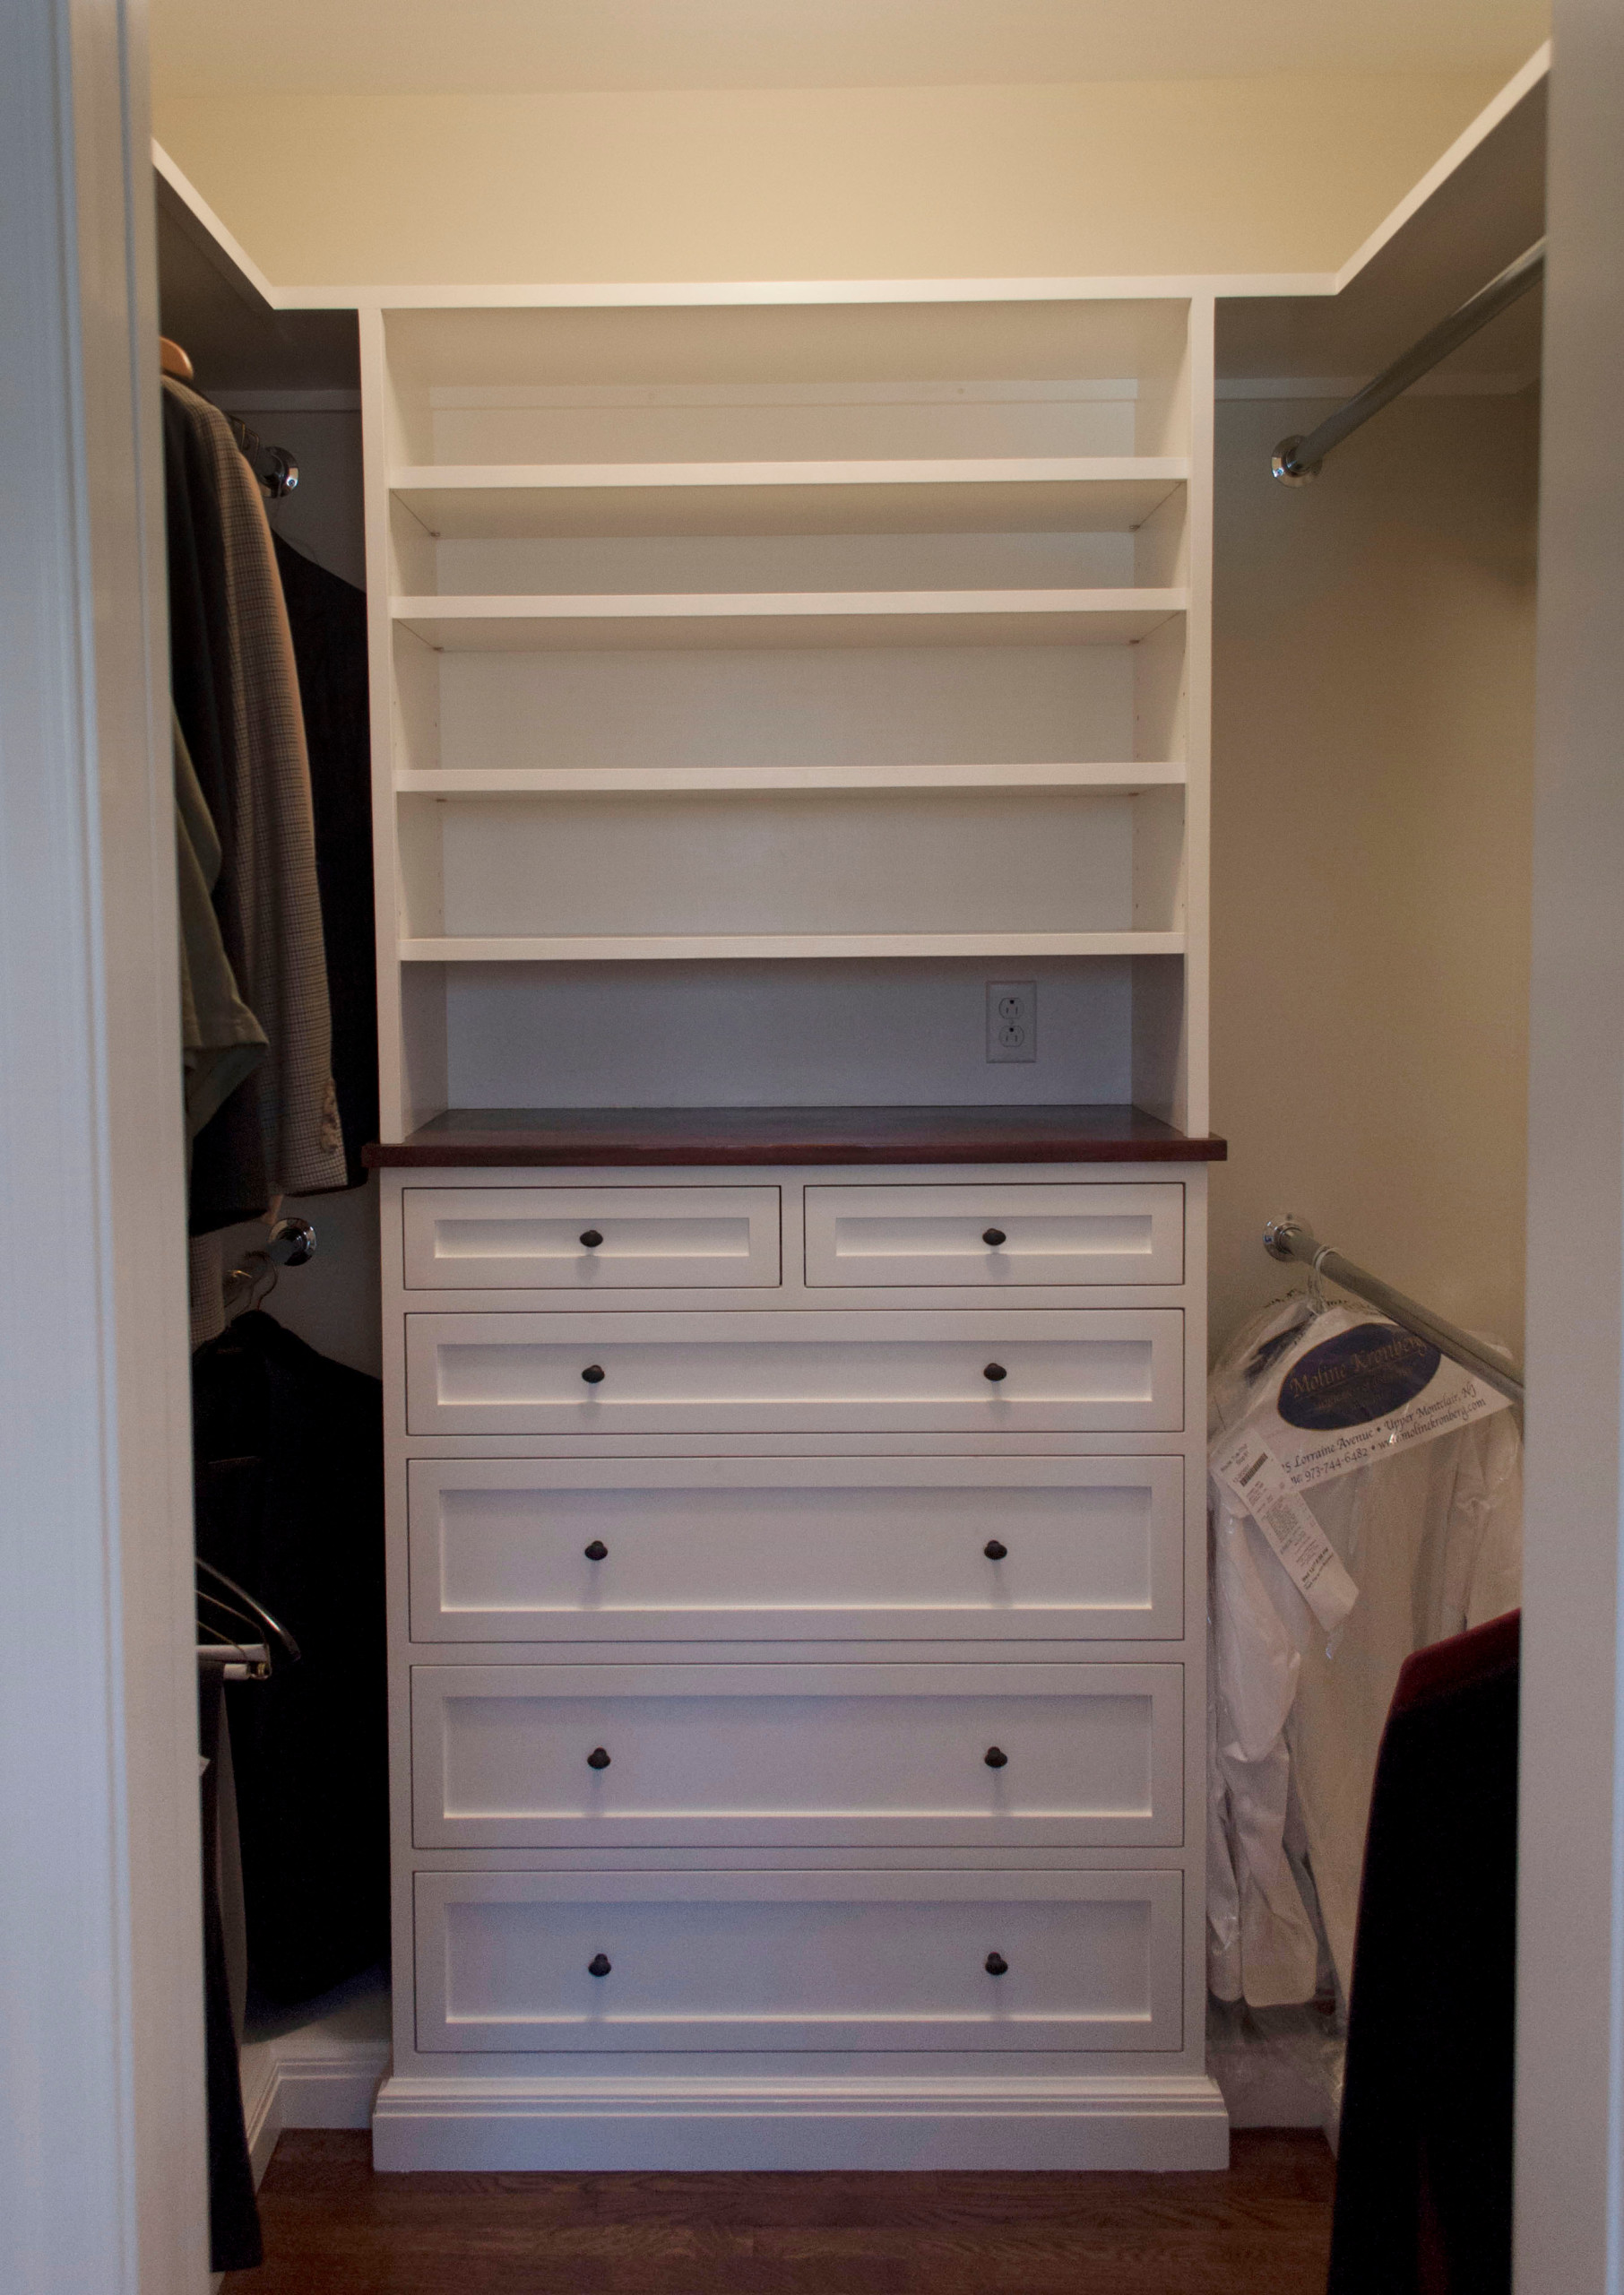 Floor to ceiling White Lacquered Closet Built Ins - Transitional - Closet